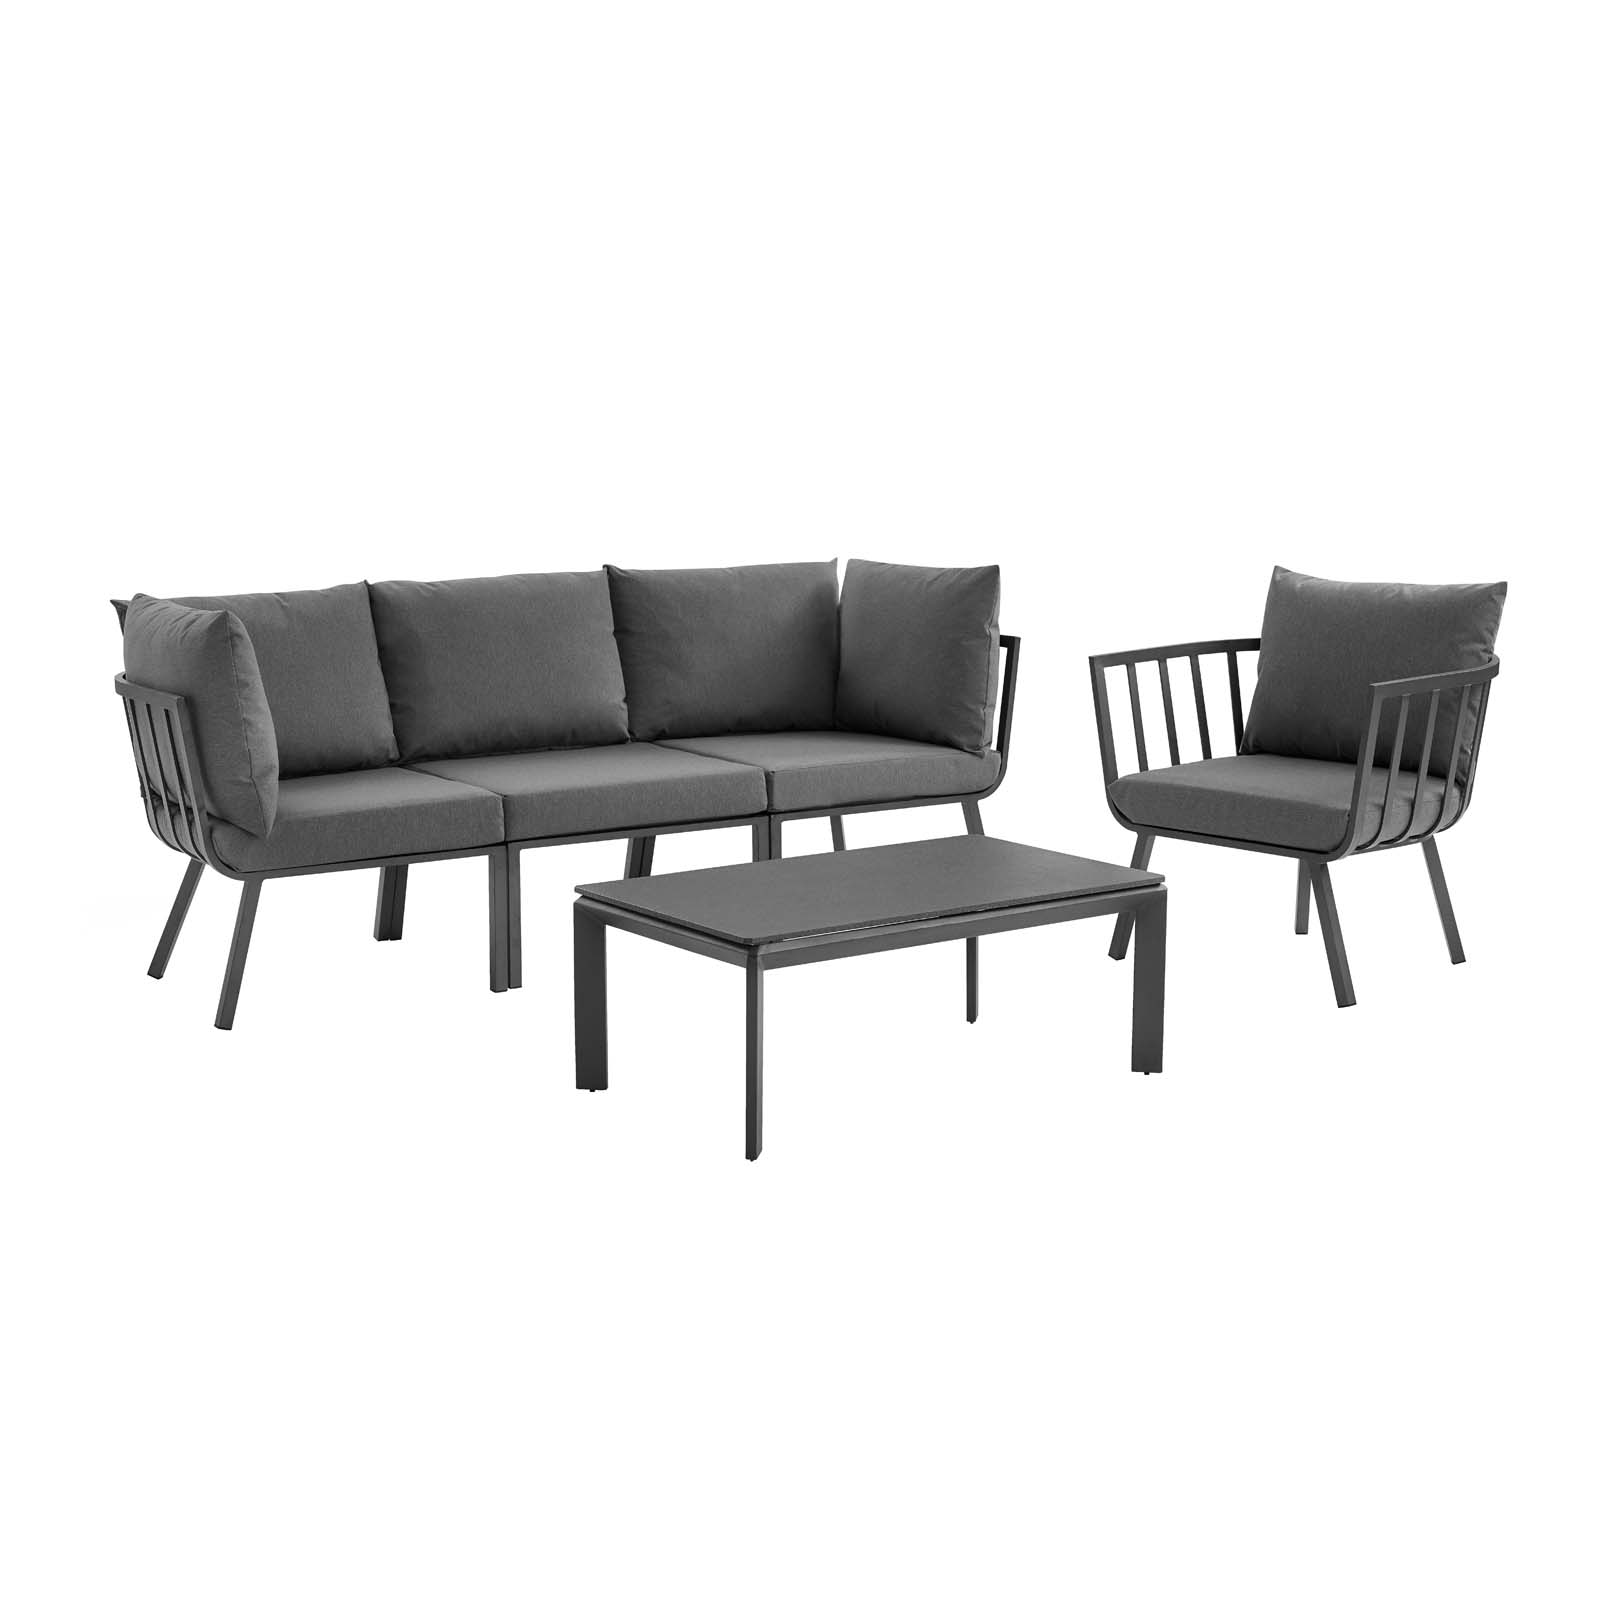 Modway Riverside 5 Piece Outdoor Patio Aluminum Set in Gray Charcoal - image 2 of 10